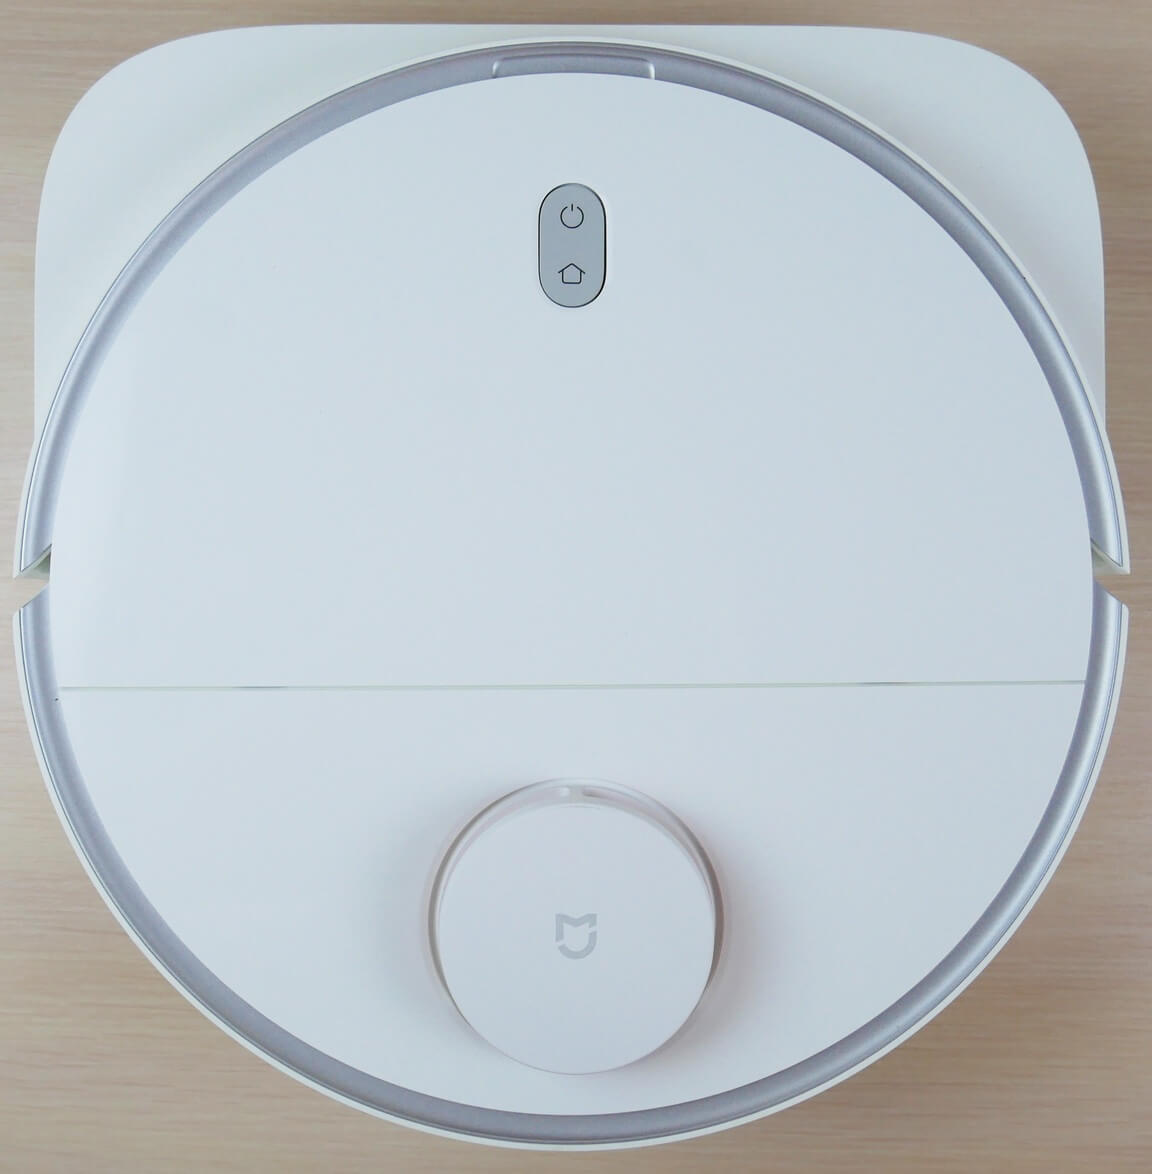 Self cleaning mop 2. Xiaomi Mijia self-Cleaning Robot Vacuum-Mop Pro. Xiaomi Robot Vacuum-Mop 2 Lite. Xiaomi Mijia self-Cleaning Robot Vacuum-Mop 2 Pro. Xiaomi Mijia Robot Vacuum-Mop 2.